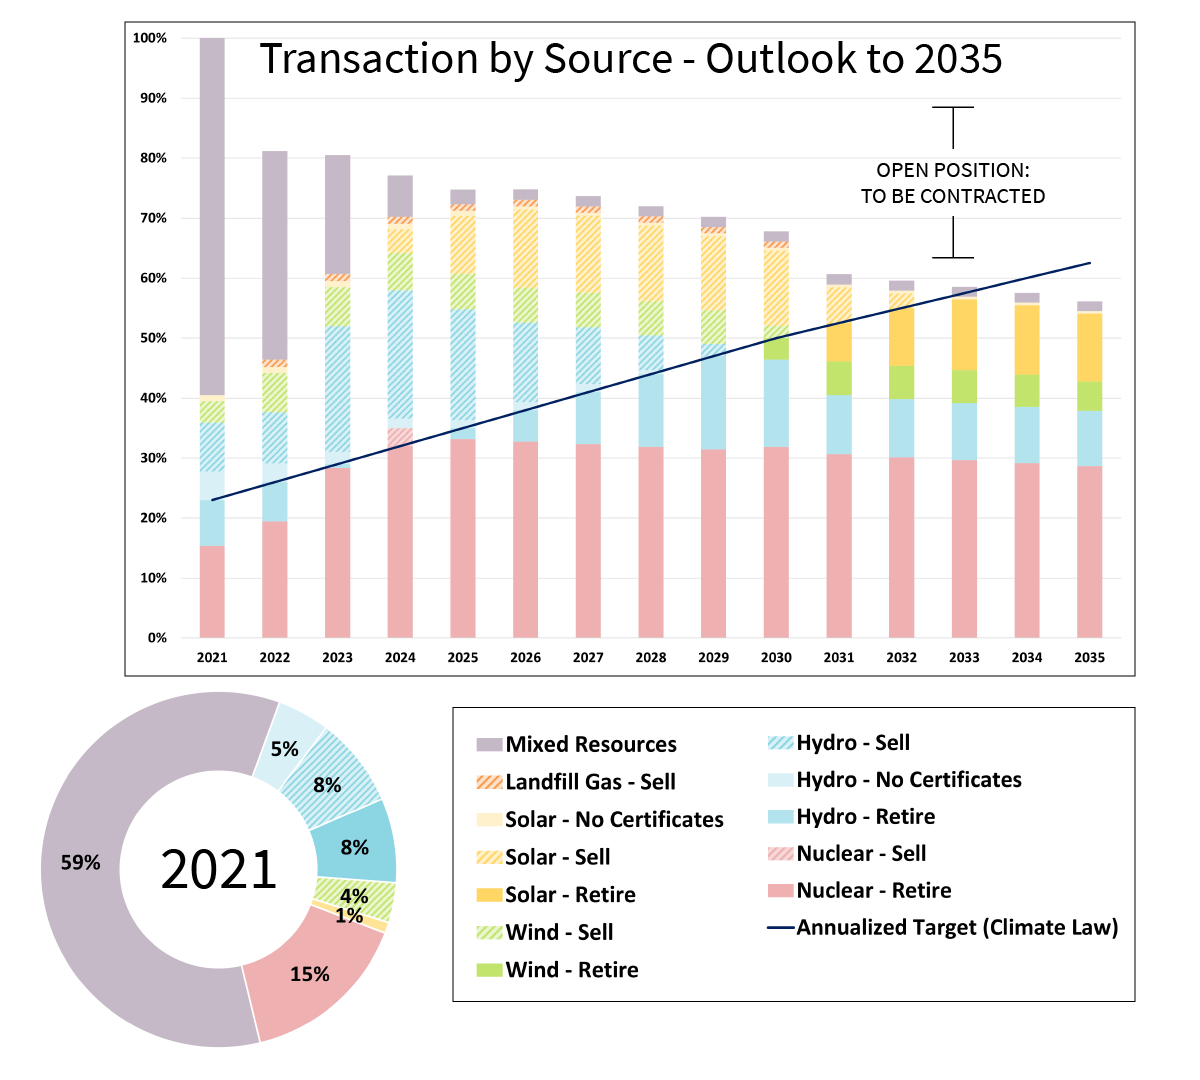 Transaction by Source Outlook to 2035